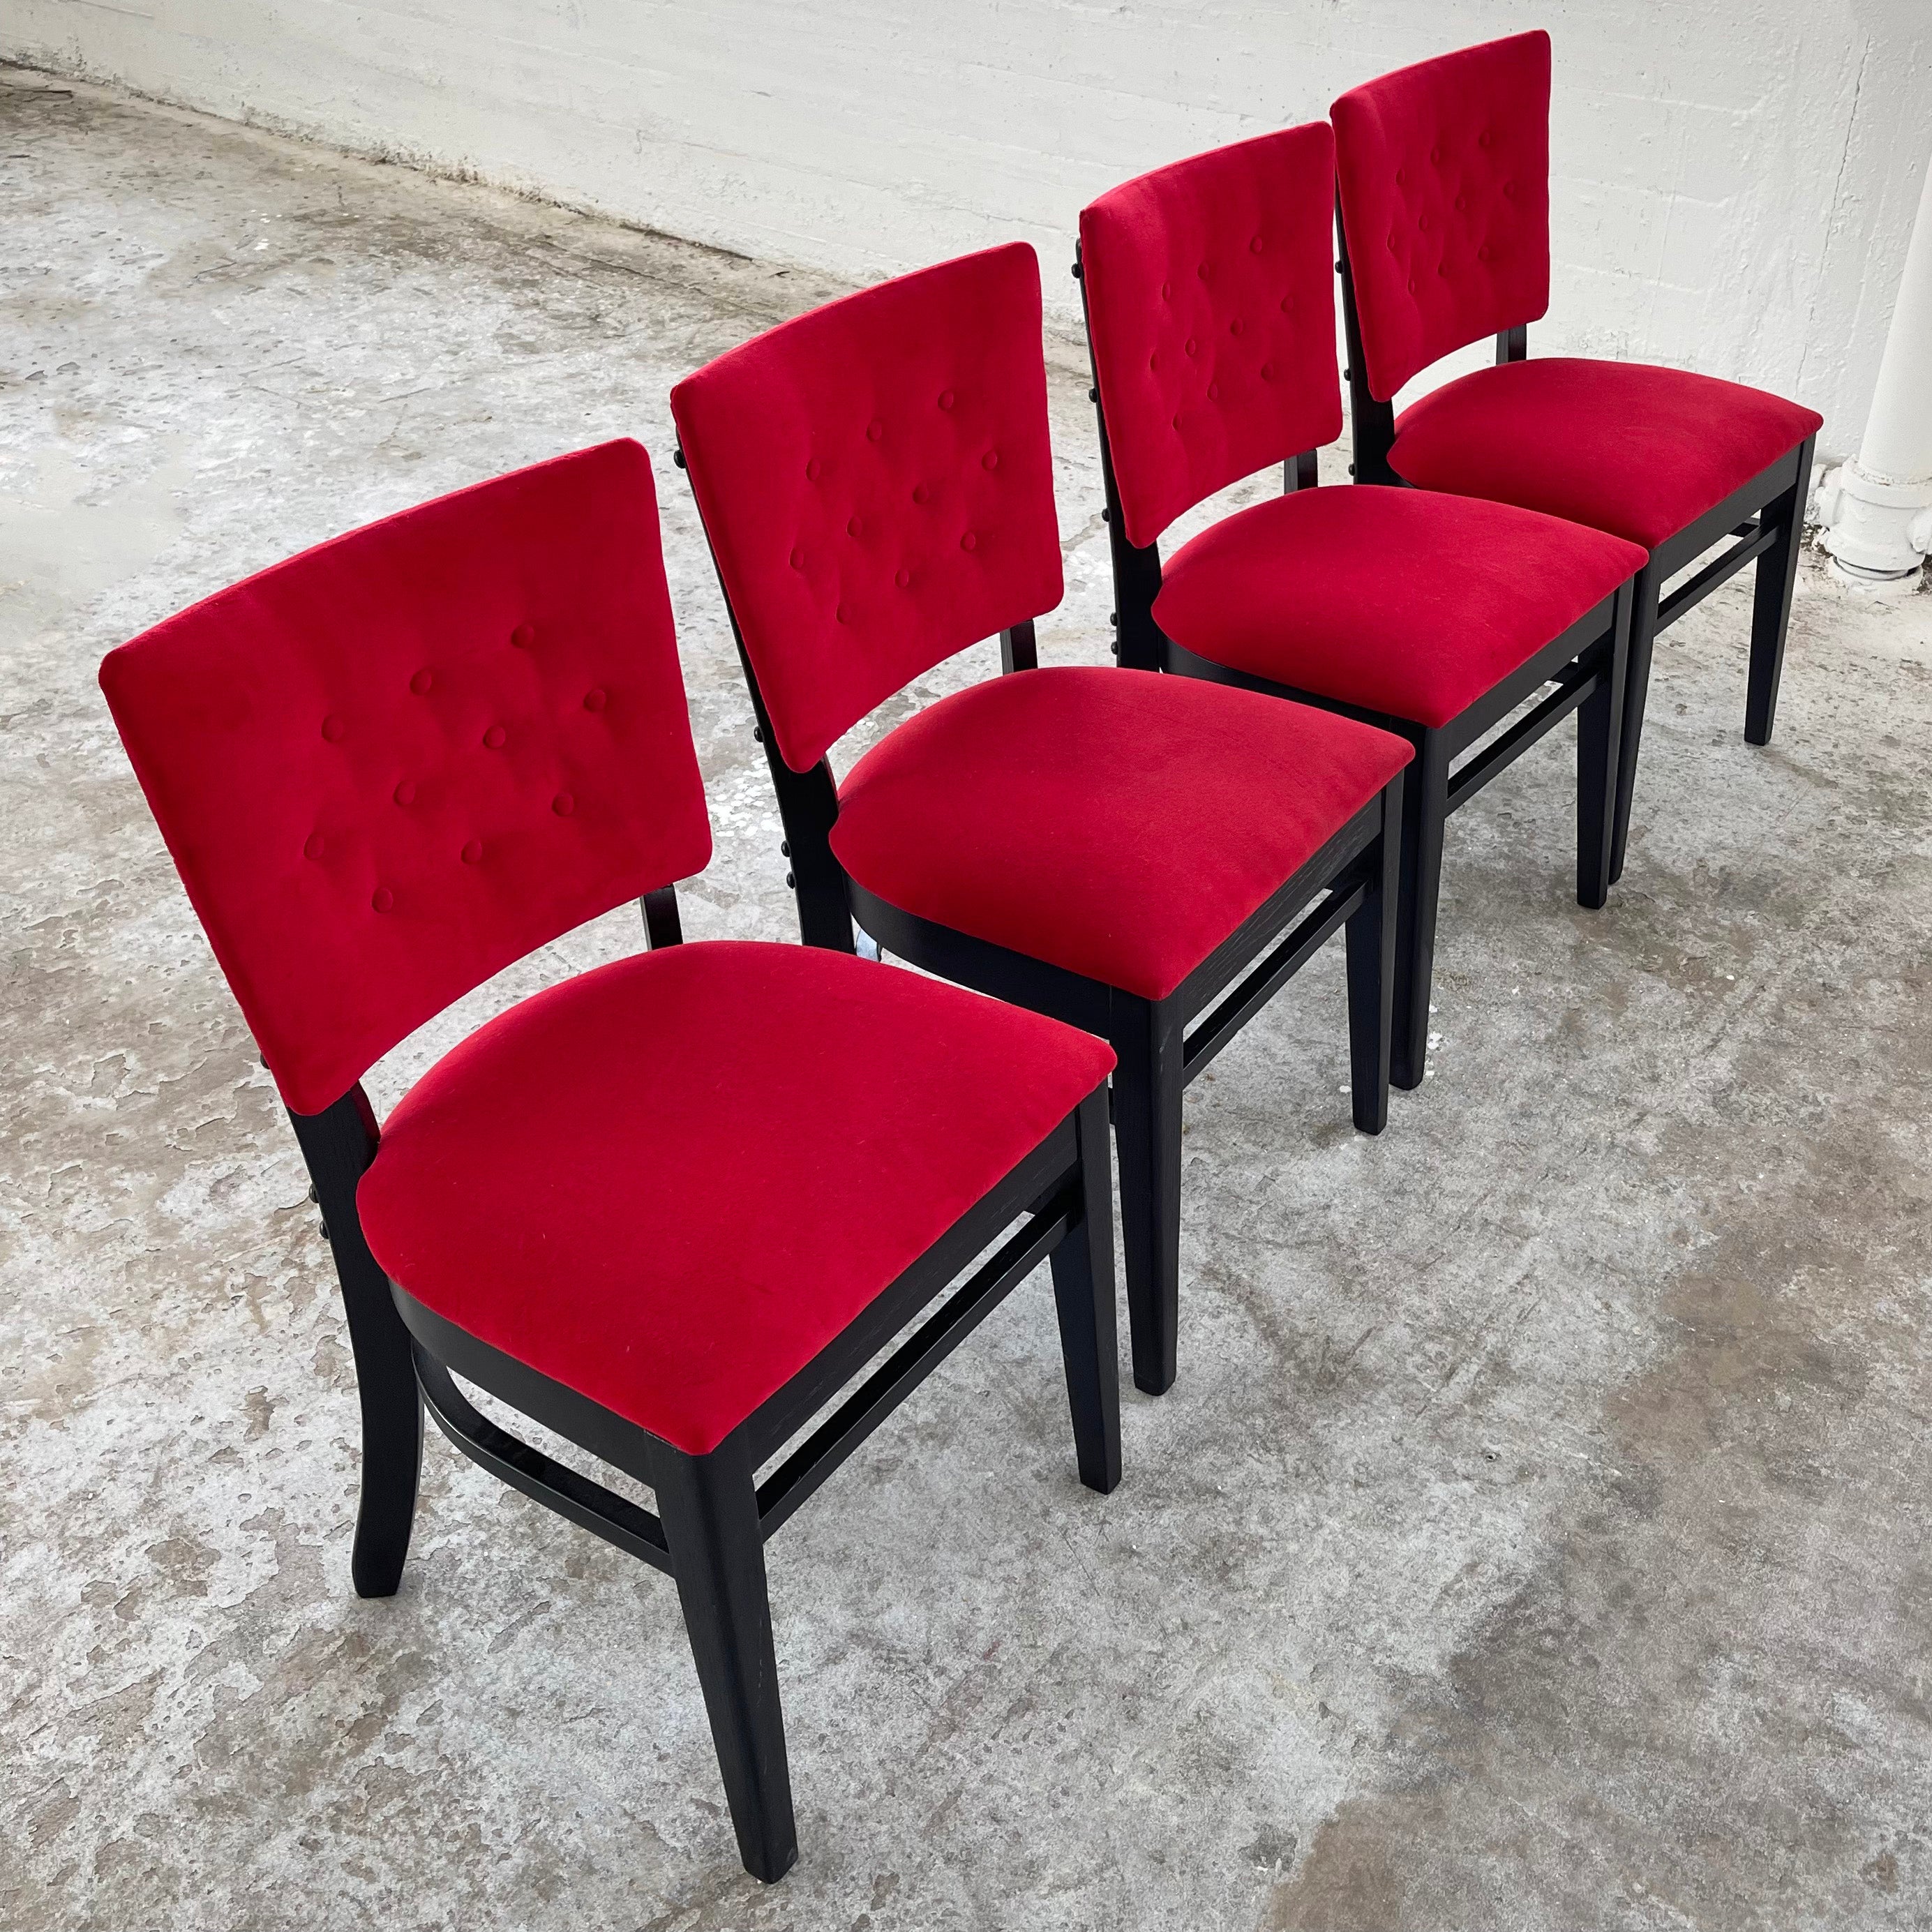 Set of four, mid-century, café bistro dining chairs circa 1940's feature vibrant red velvet upholstery with button tufted backs and ebonized oak frames. A bold color twist on these classic café chairs in sumptuous velvet. 